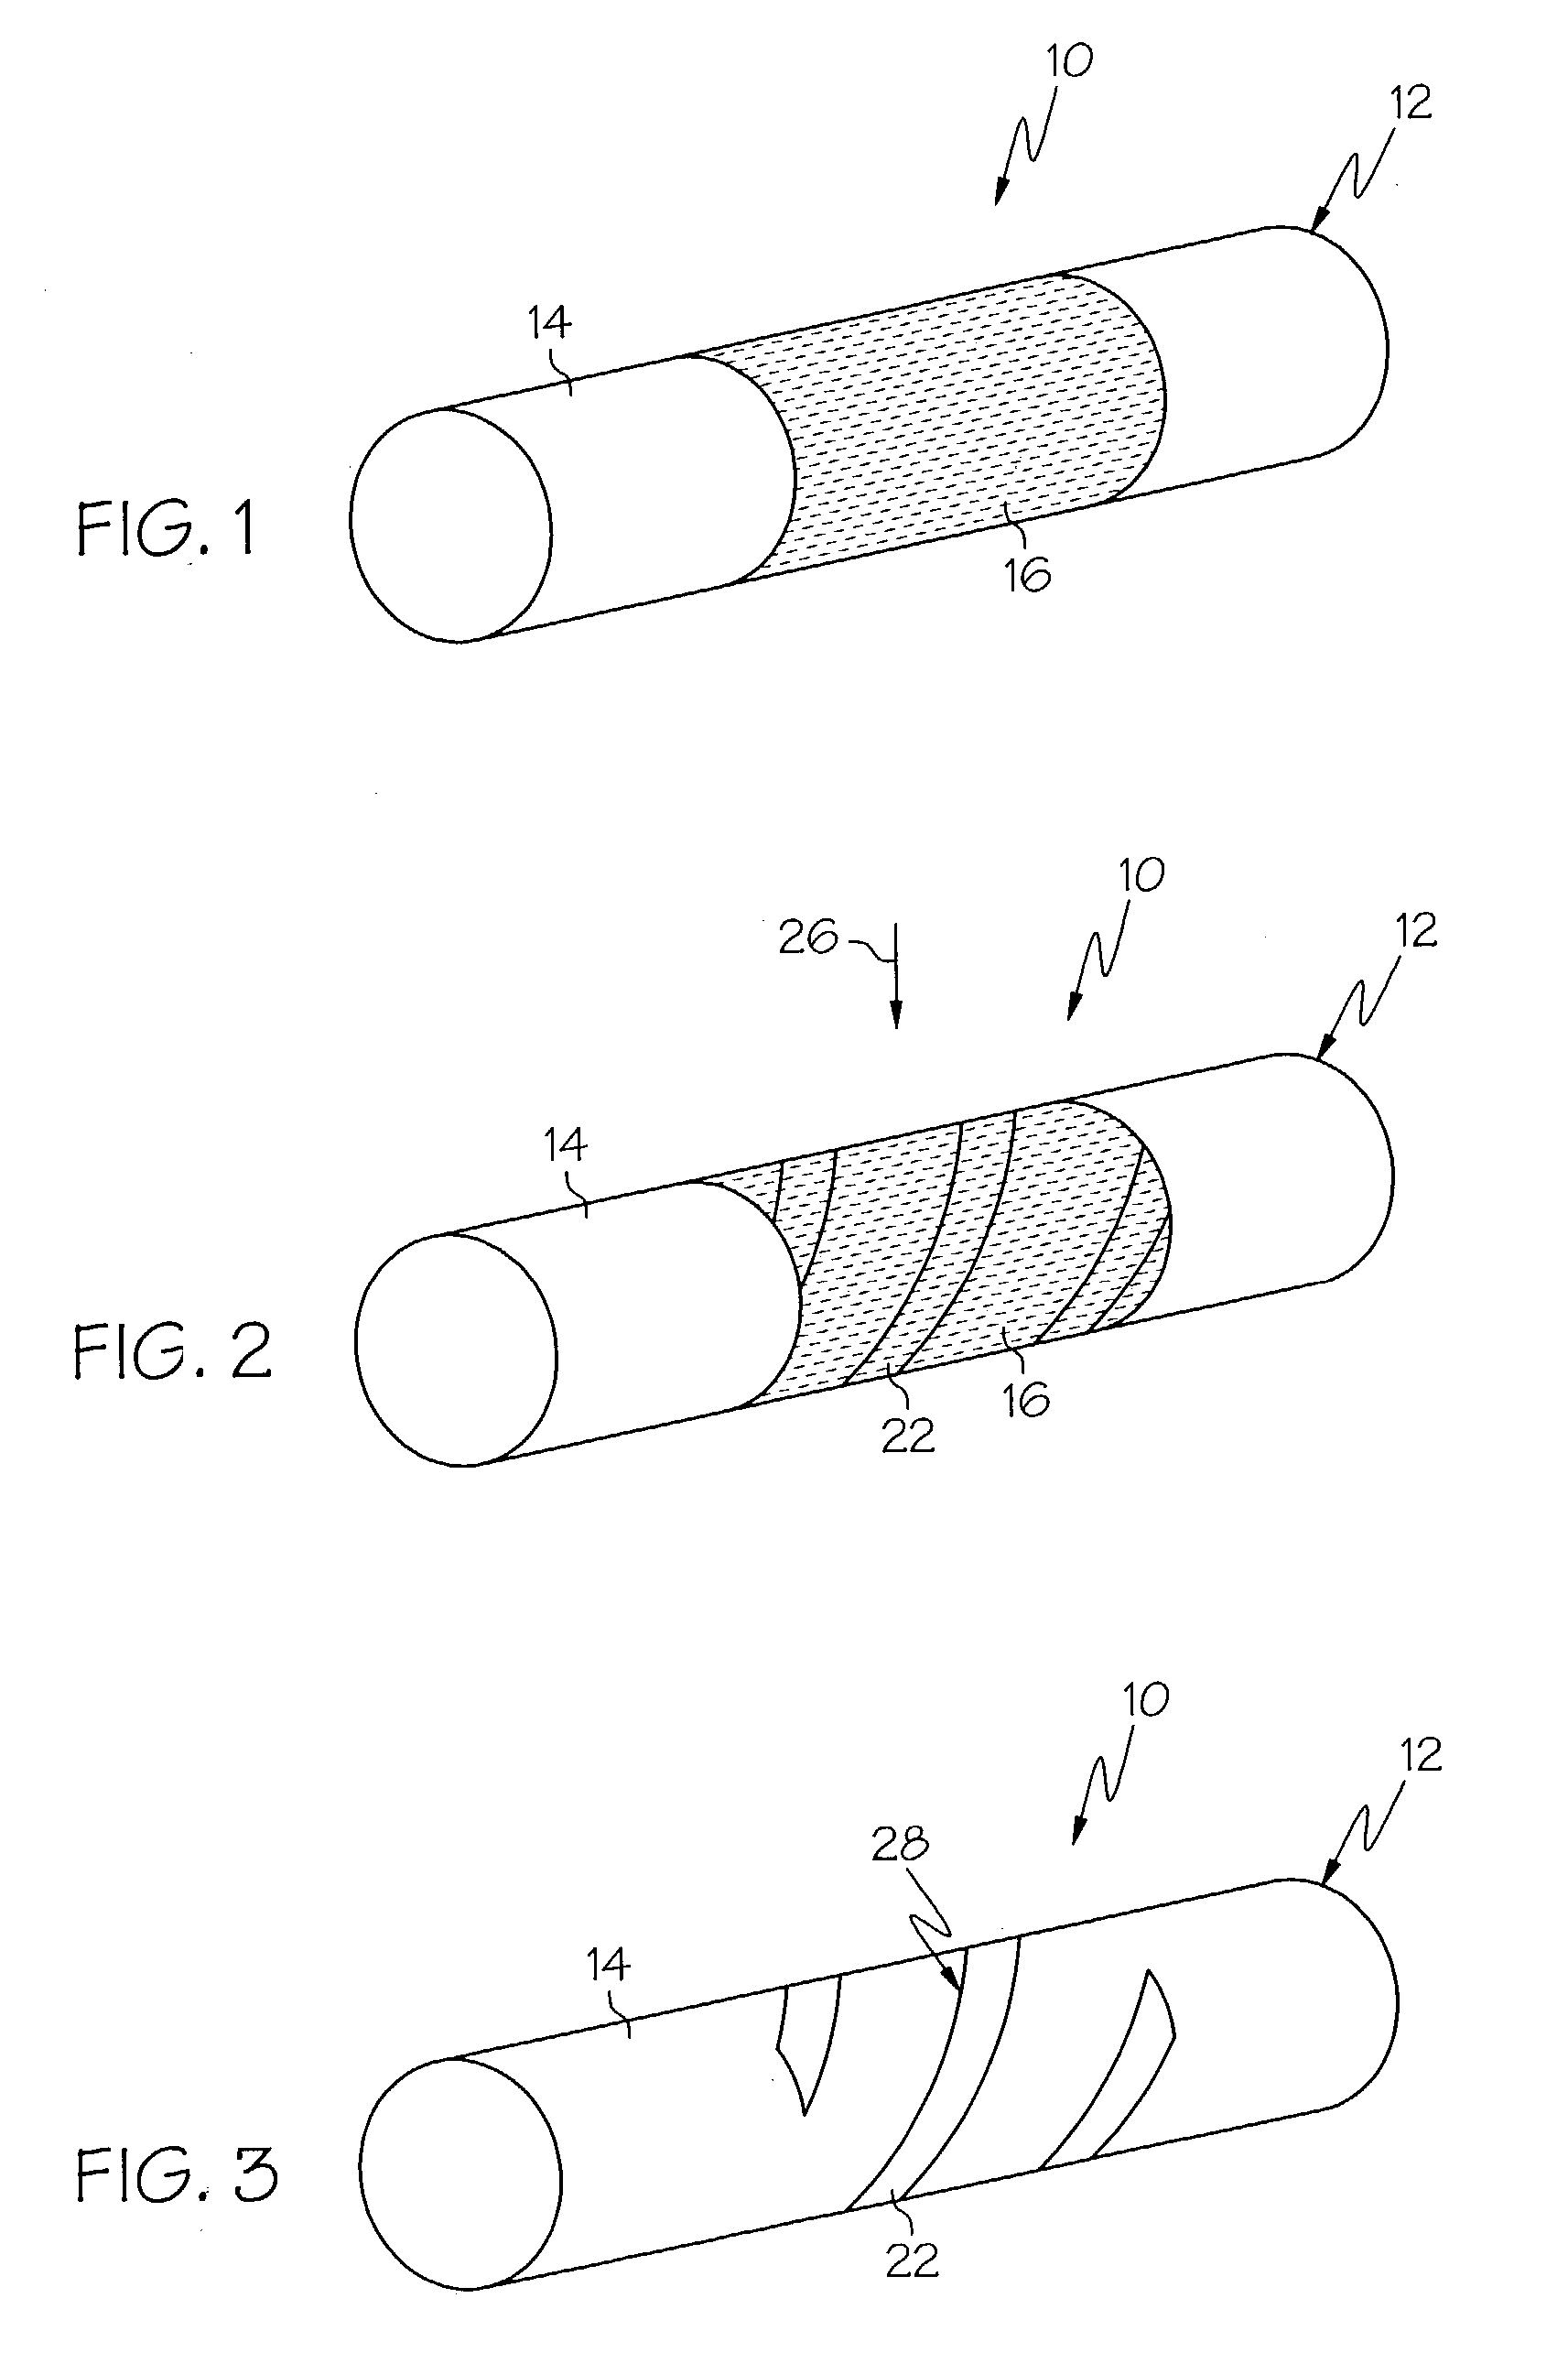 Laser sintering process and devices made therefrom